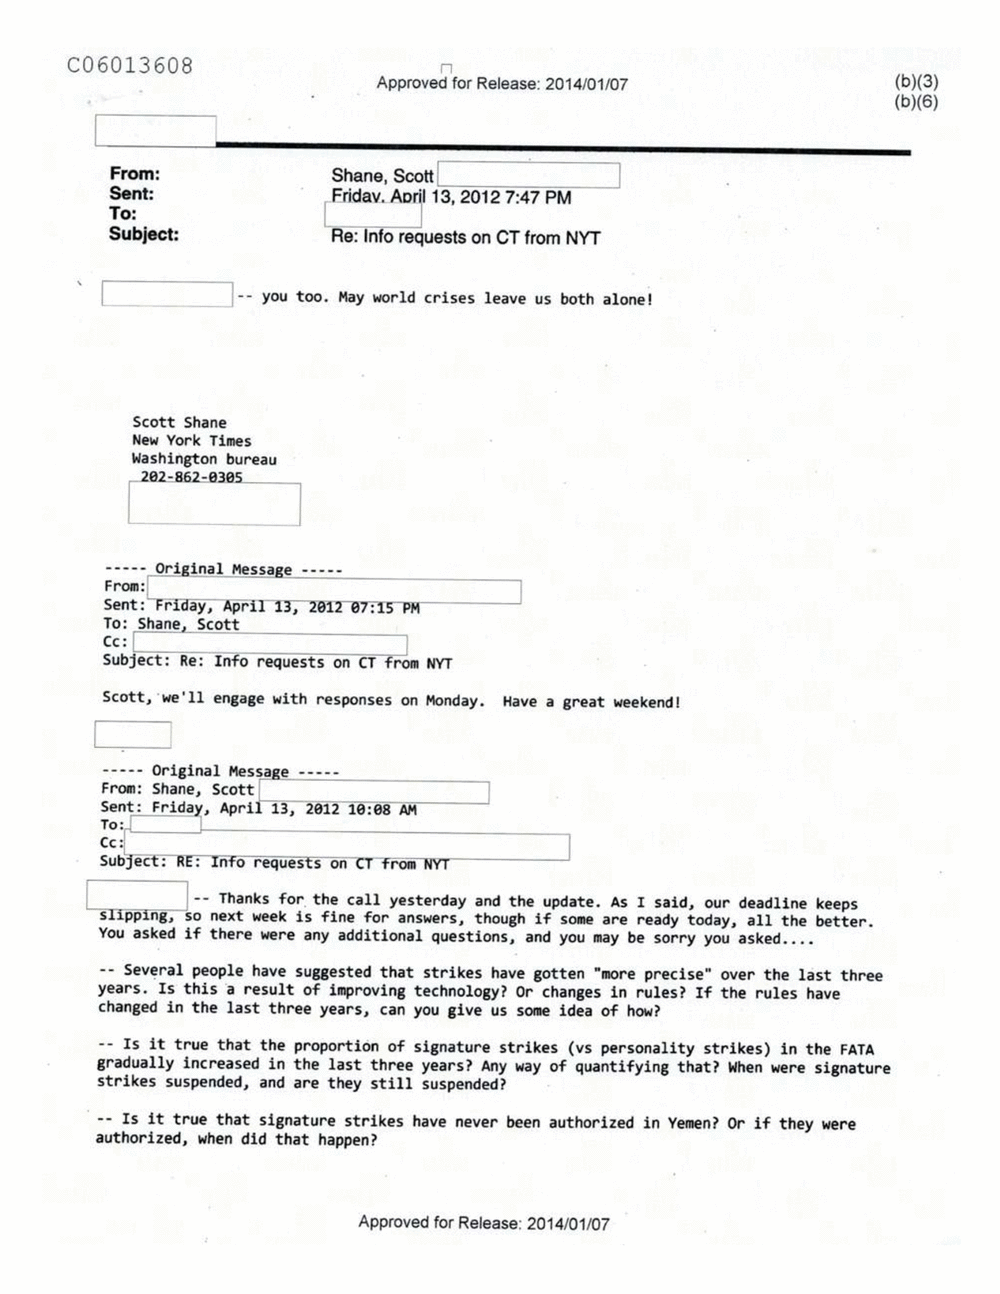 Page 419 from Email Correspondence Between Reporters and CIA Flacks